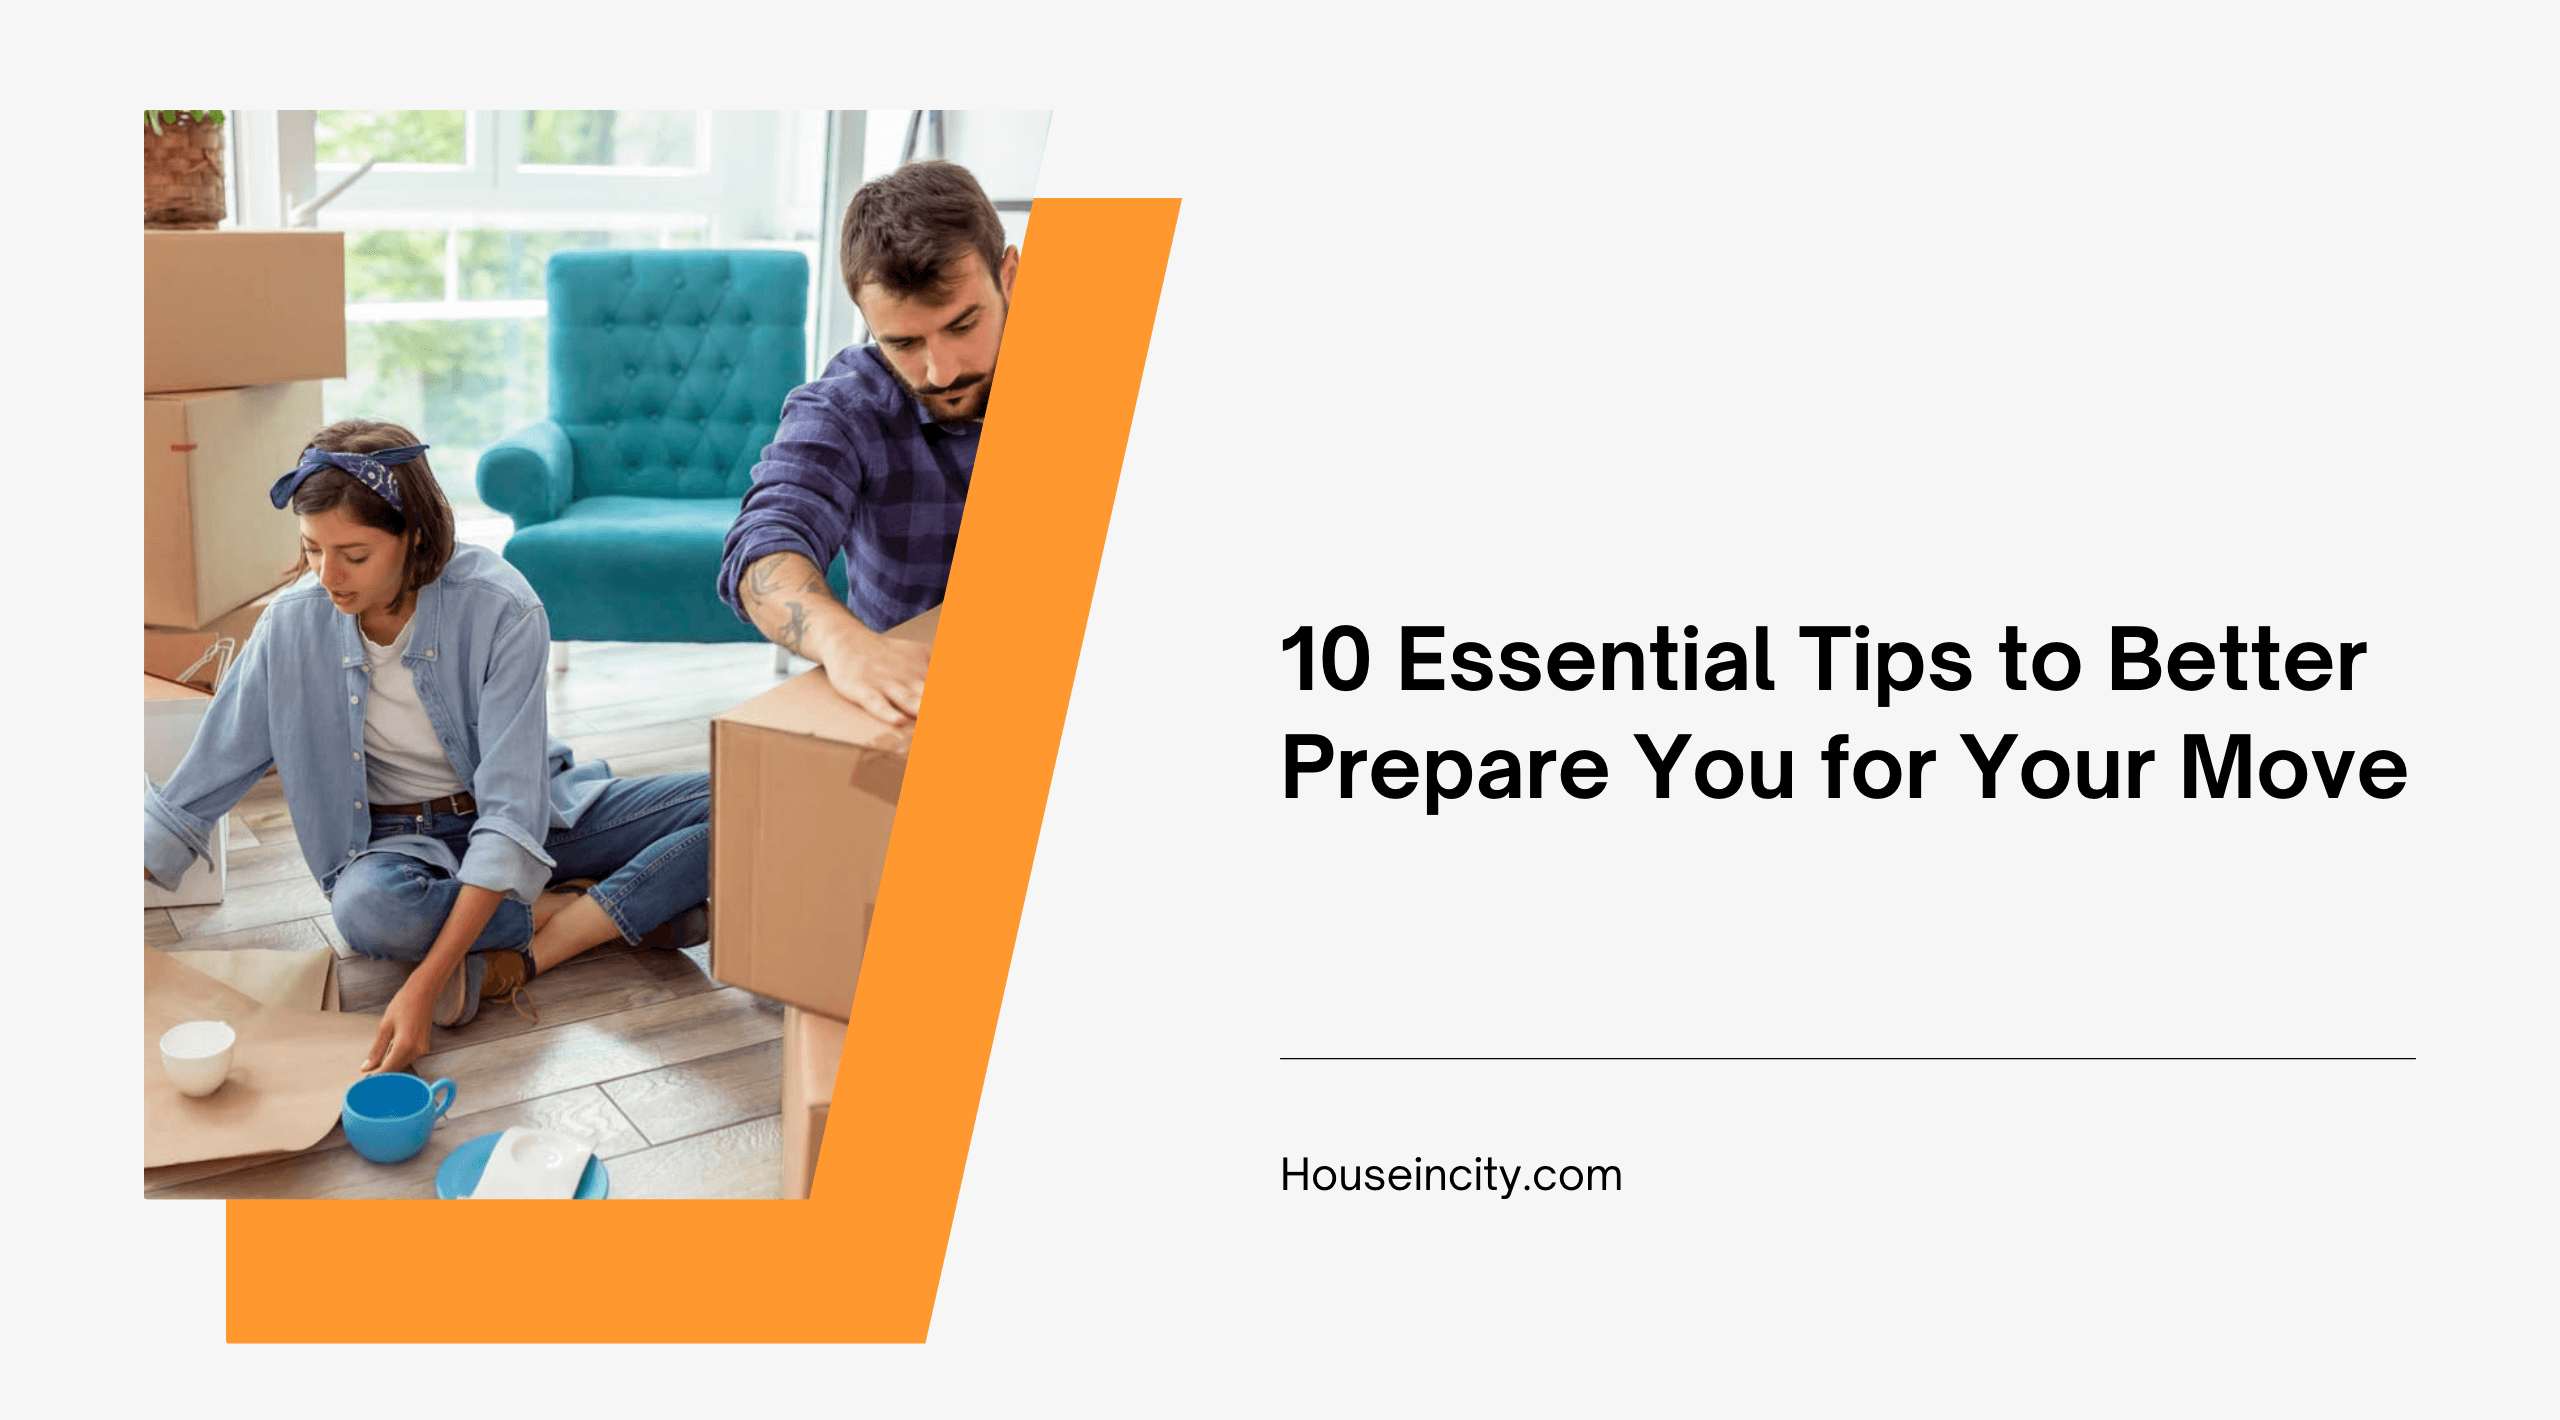 10 Essential Tips to Better Prepare You for Your Move